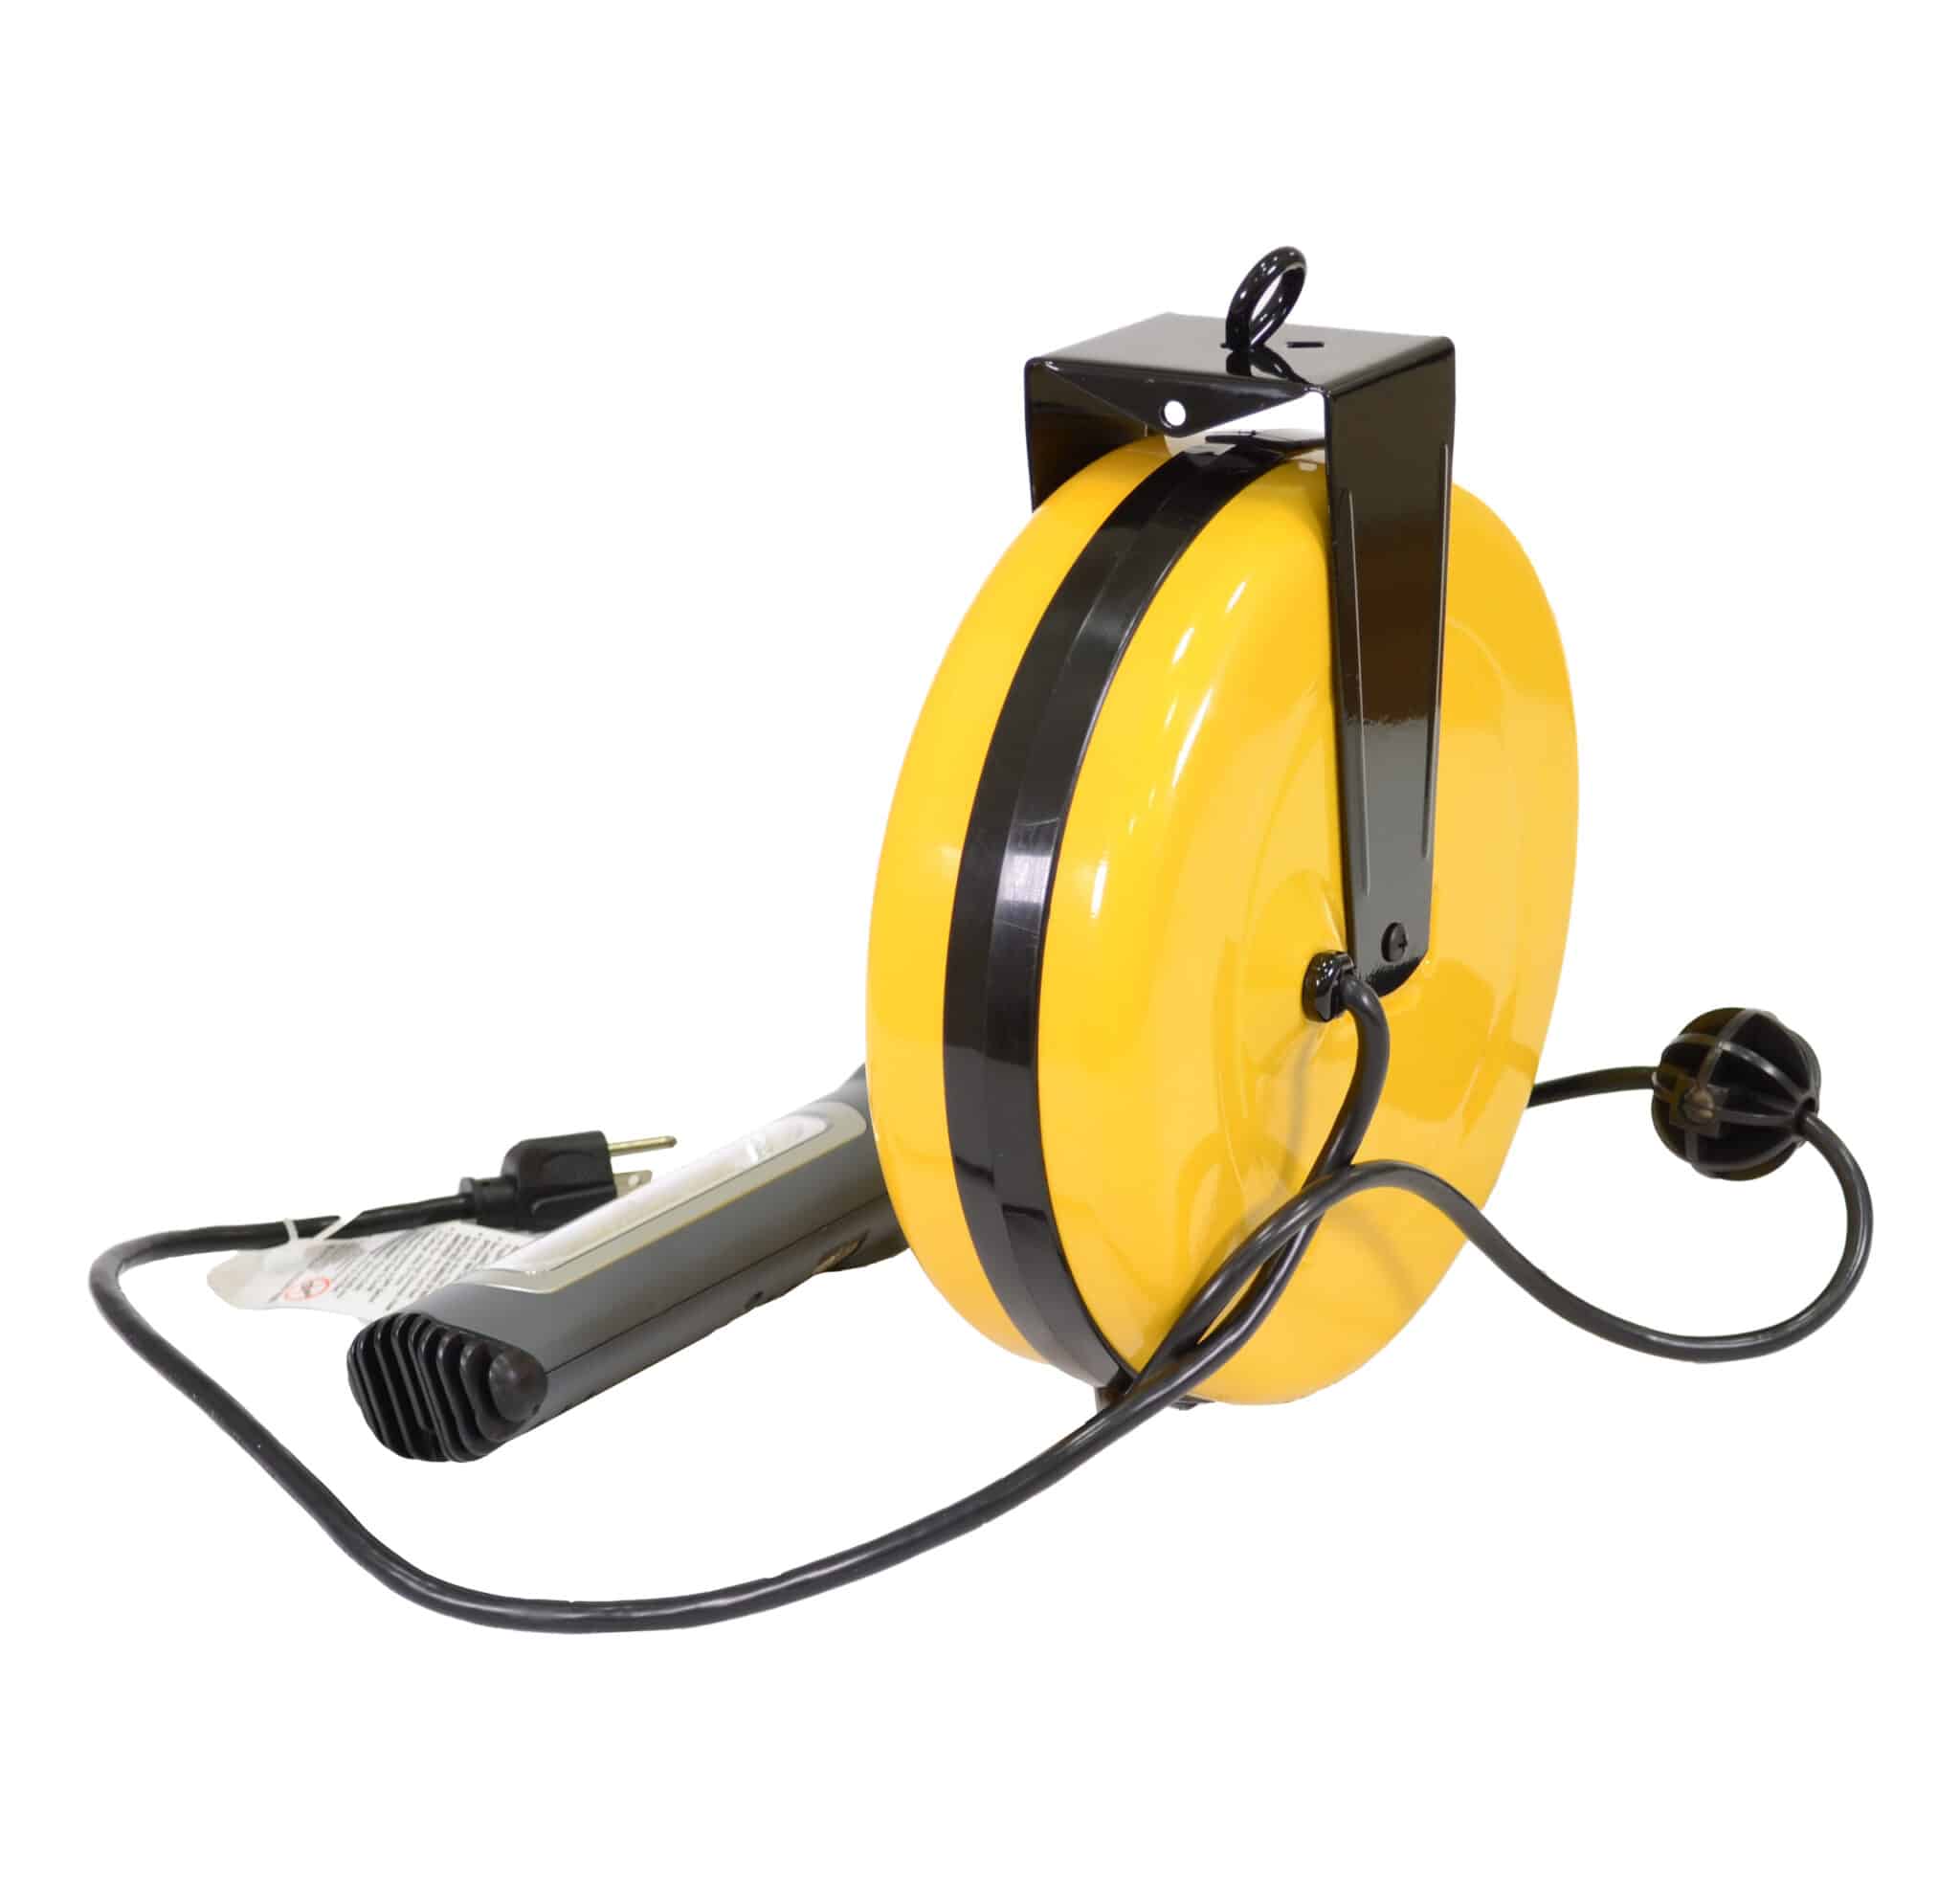 30' Pro-Grade Retractable Cord Reel with LED Light - 3230SMS